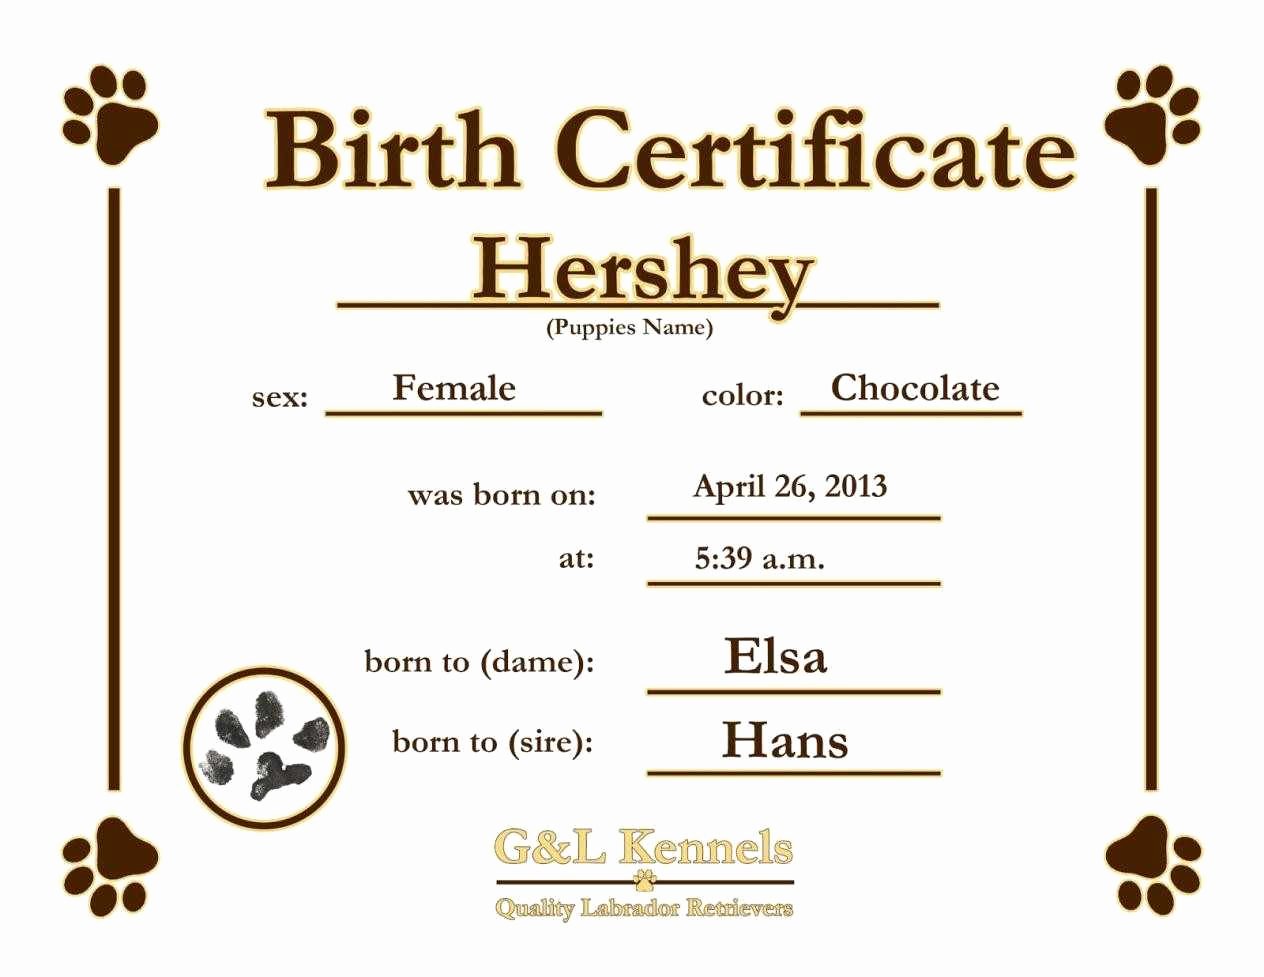 Birth Certificate Template Free Awesome Certificate Templates Sample Birth Certificates